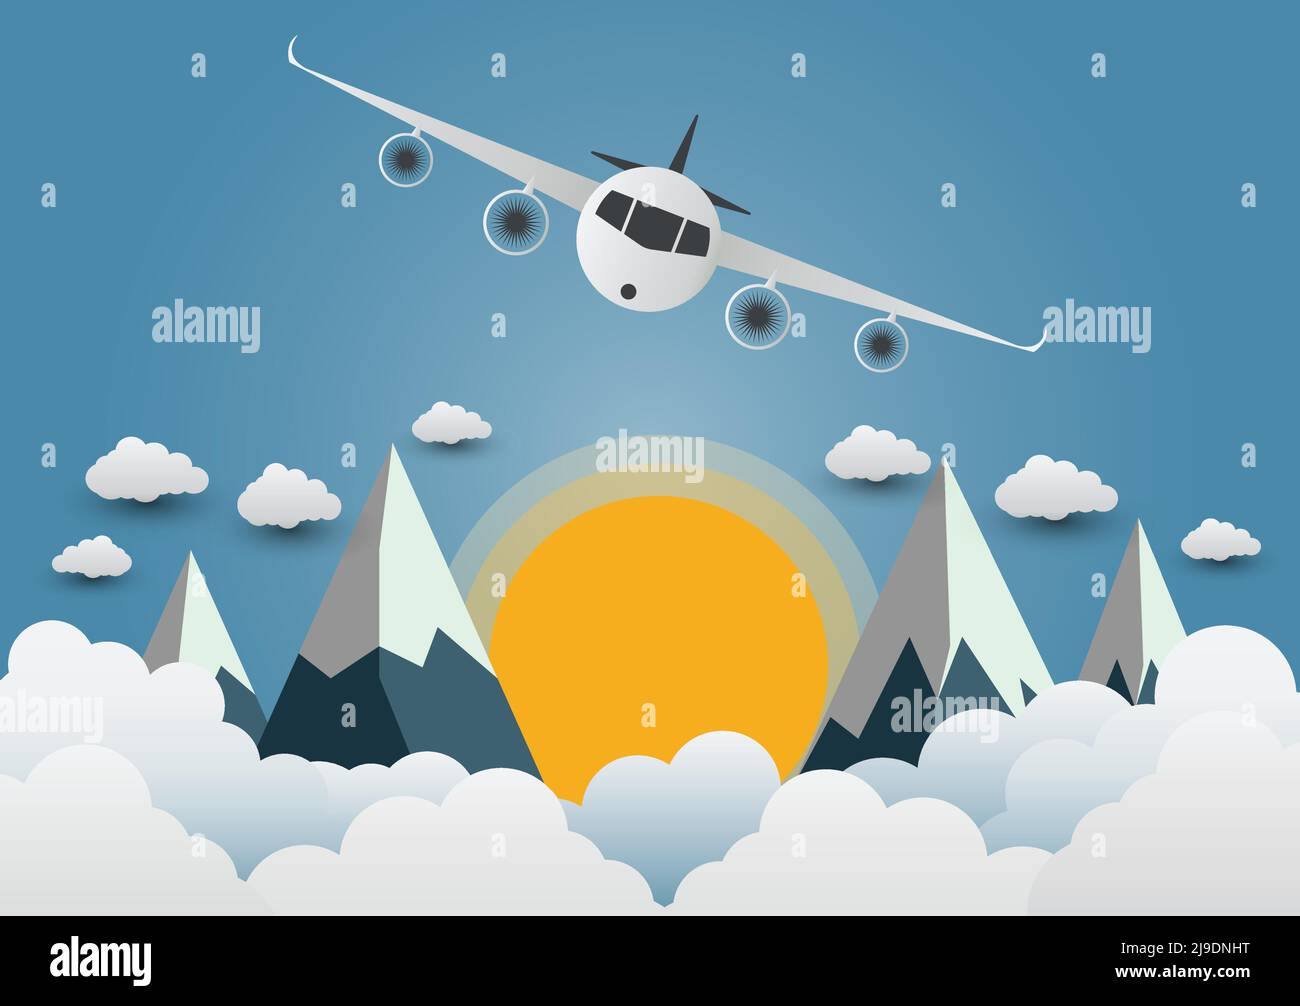 The plane soars over the mountains with beautiful sunsets over the clouds,Vector illustration Stock Vector